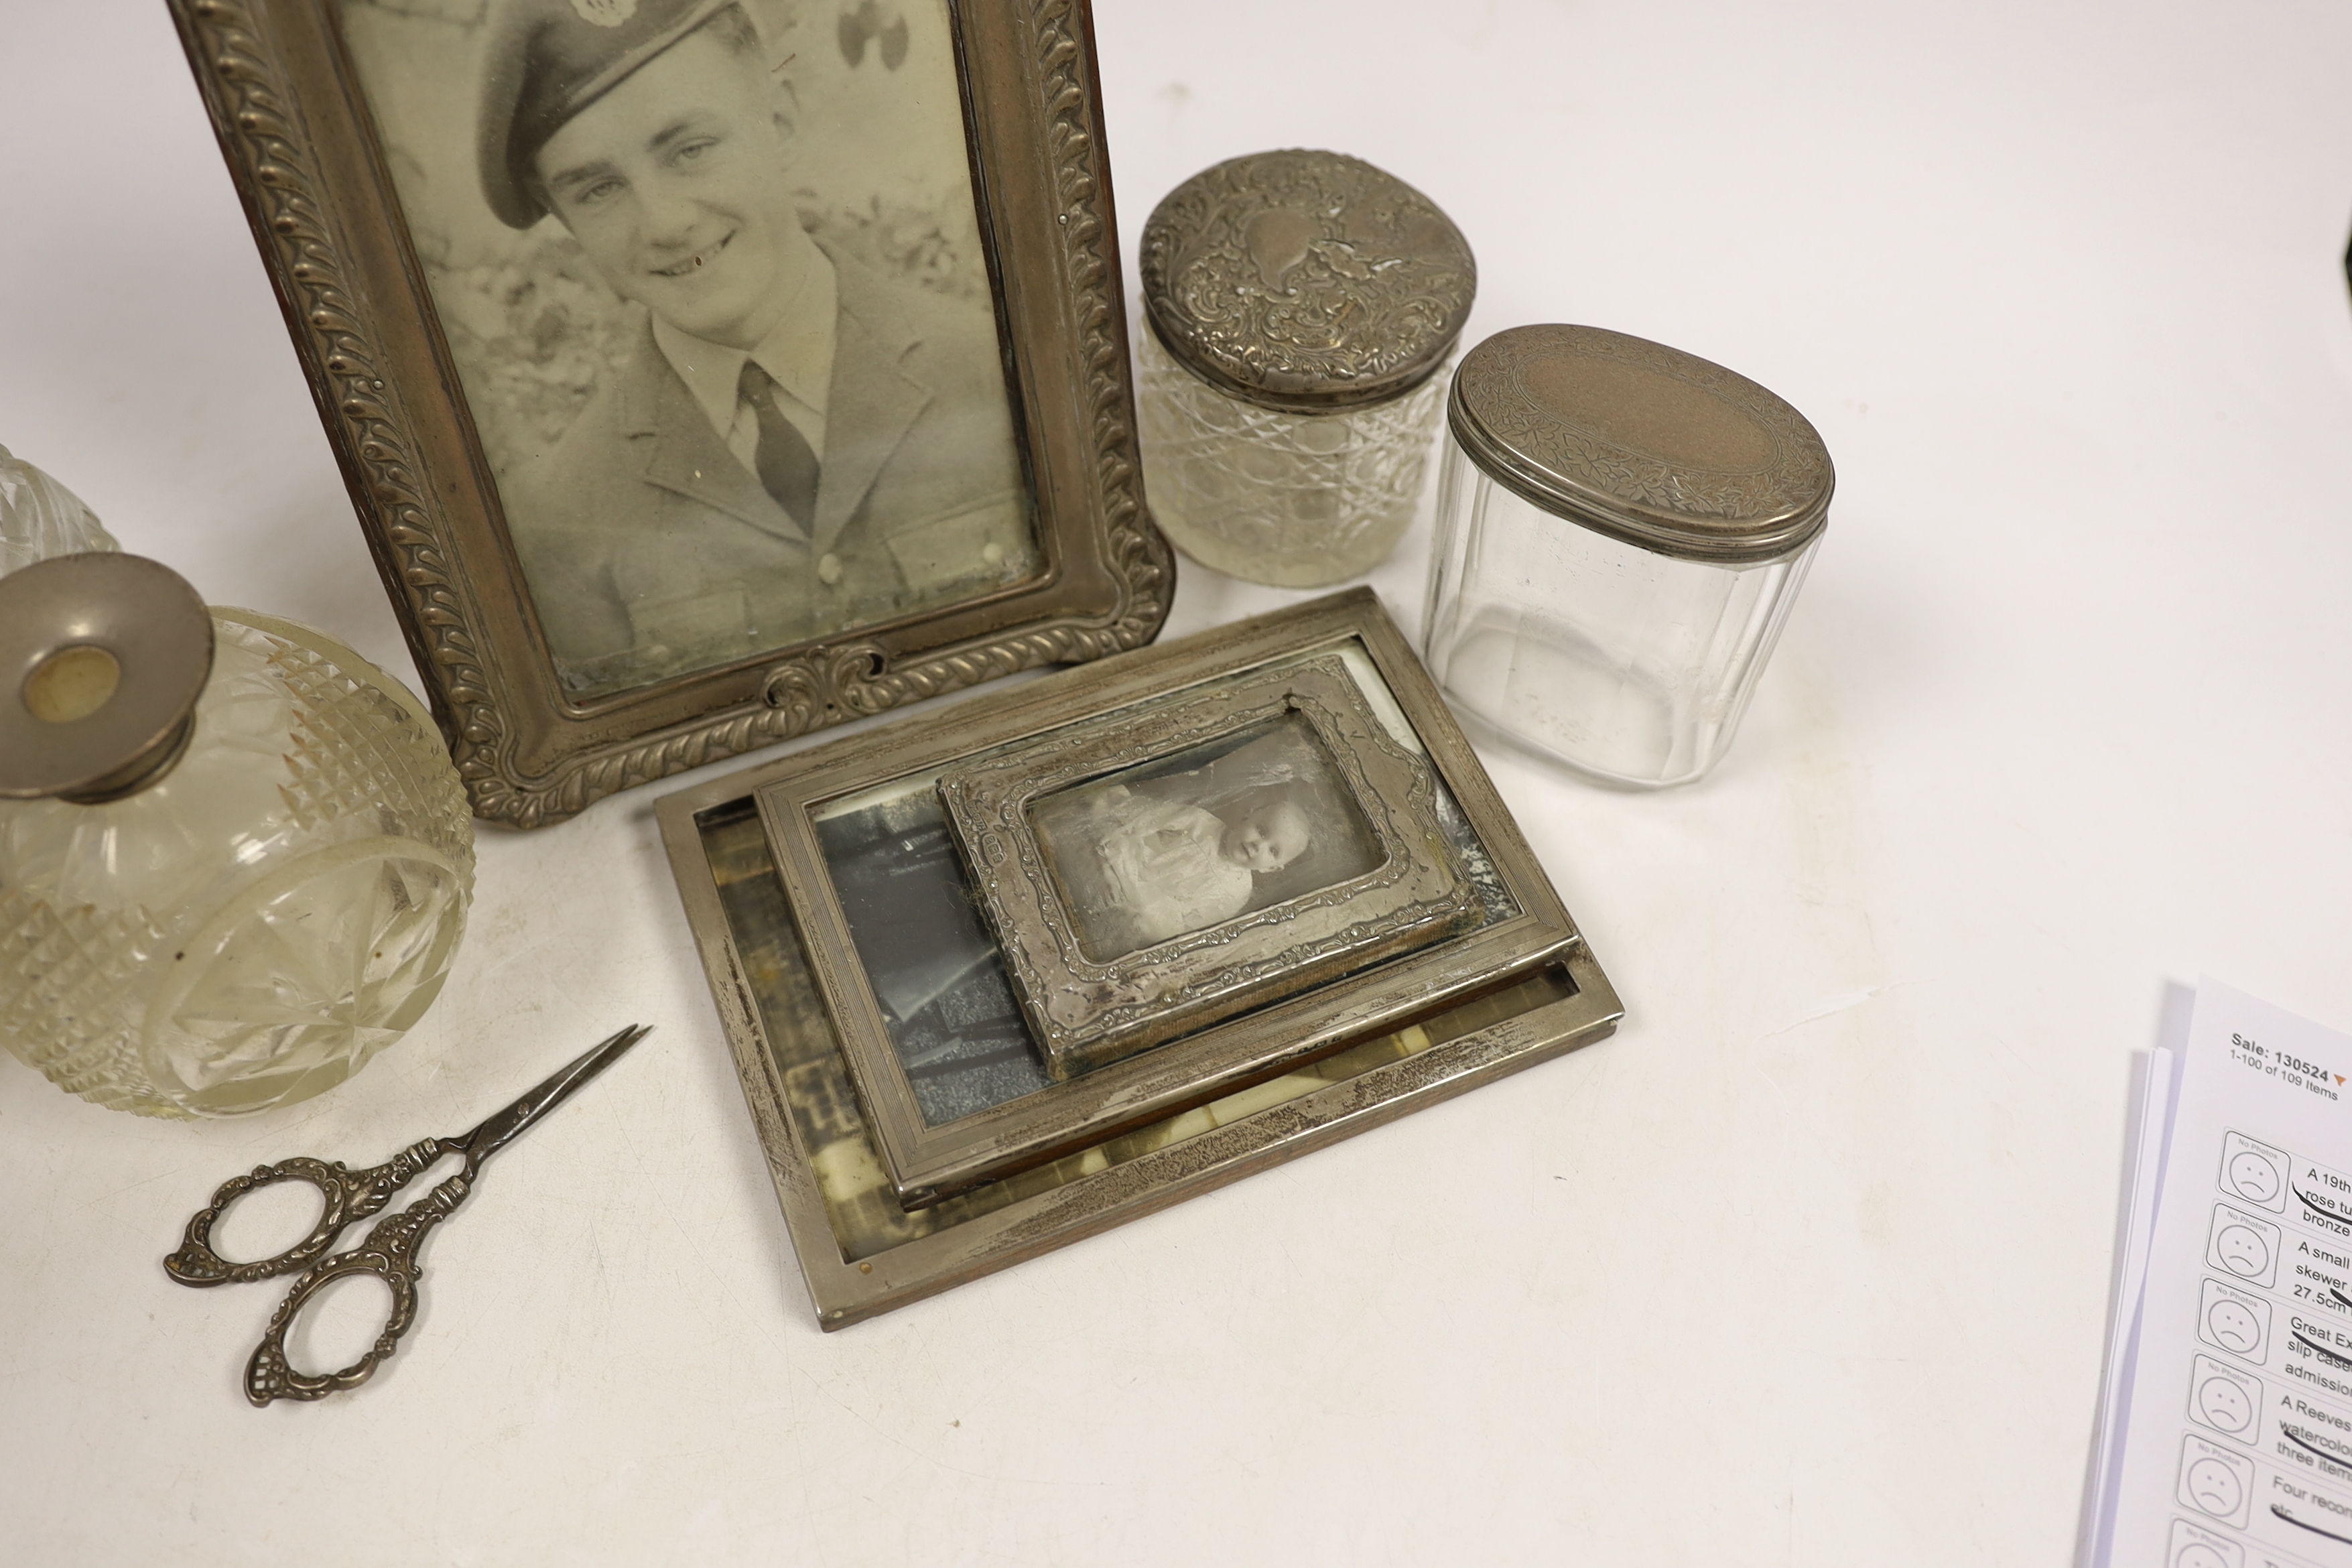 Four assorted early 20th century silver mounted photograph frames, largest 19.5cm (a.f.) five assorted silver mounted glass toilet jars and a small pair of silver handled scissors.